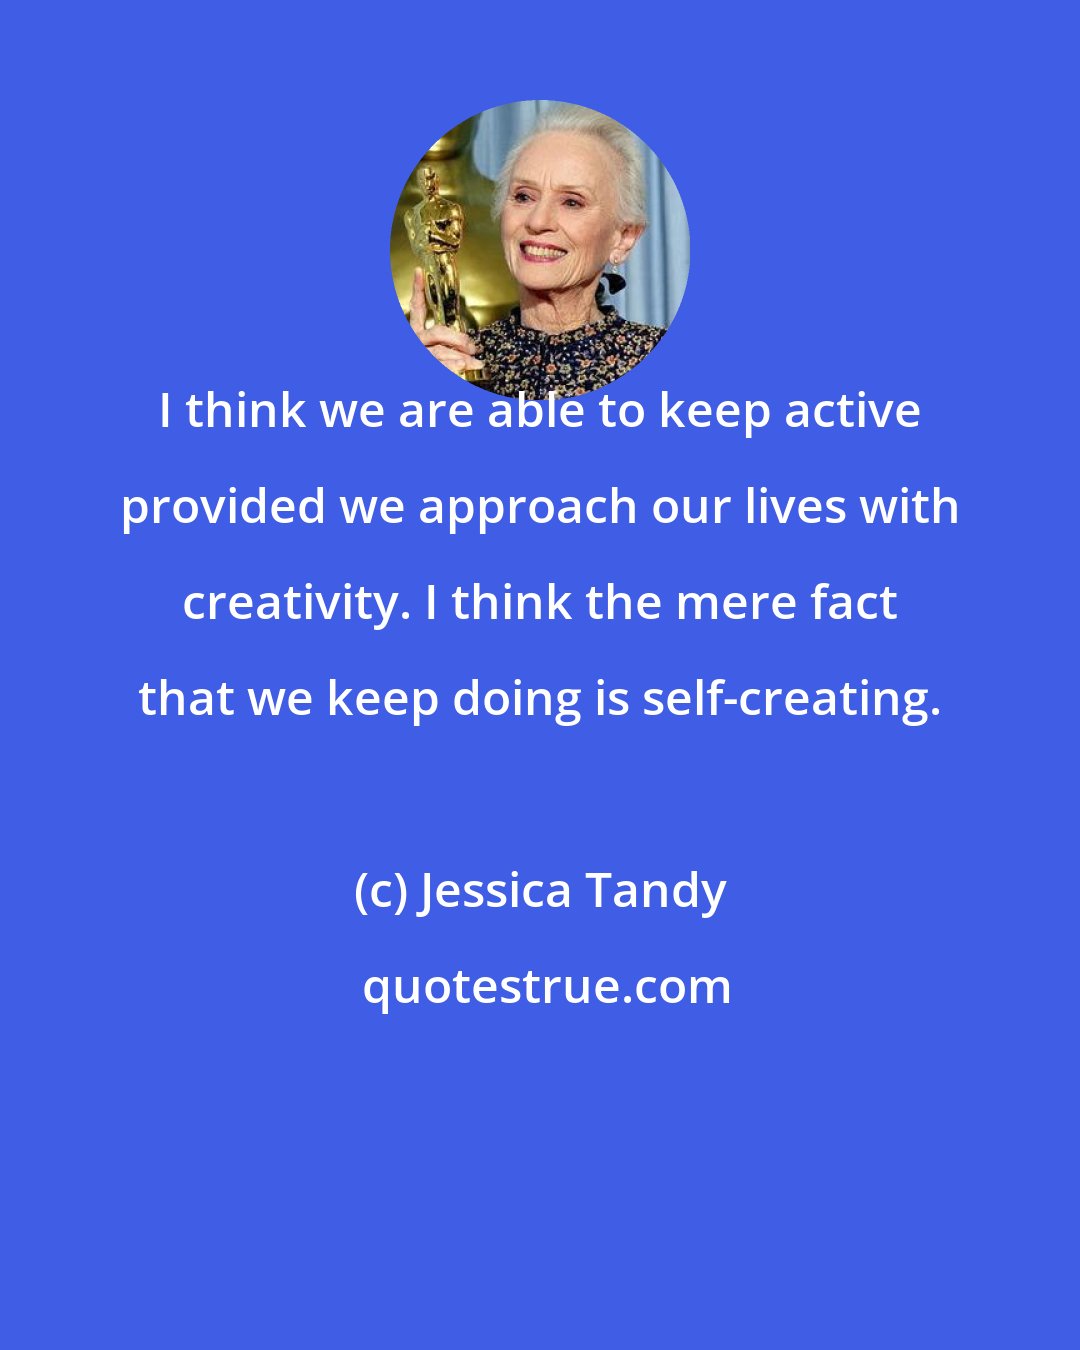 Jessica Tandy: I think we are able to keep active provided we approach our lives with creativity. I think the mere fact that we keep doing is self-creating.